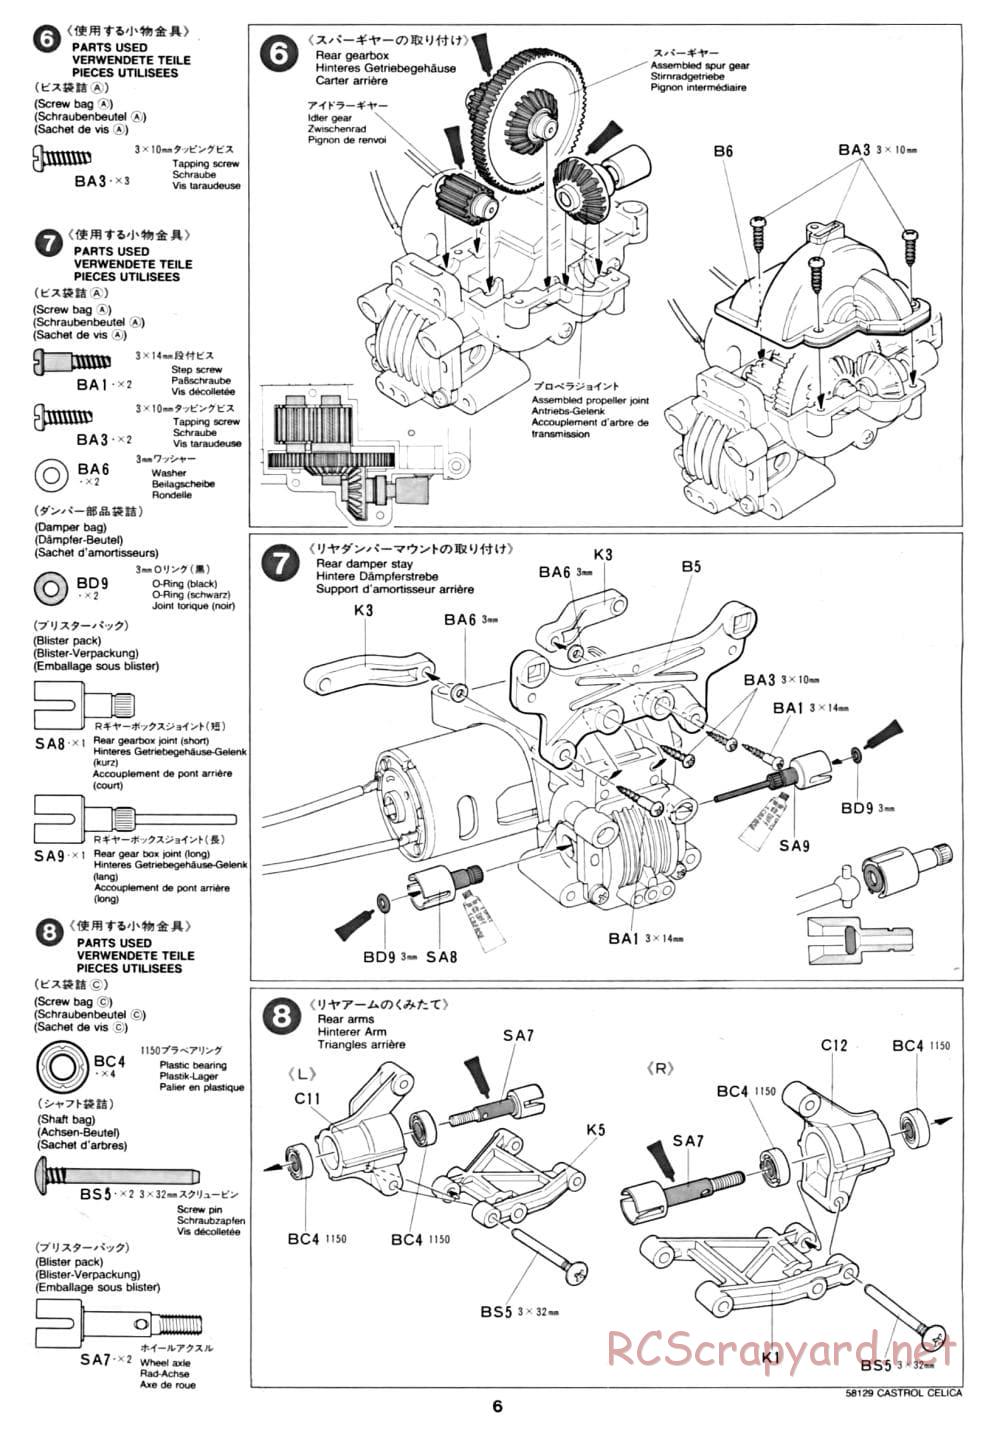 Tamiya - Castrol Celica 93 Monte-Carlo - TA-02 Chassis - Manual - Page 6